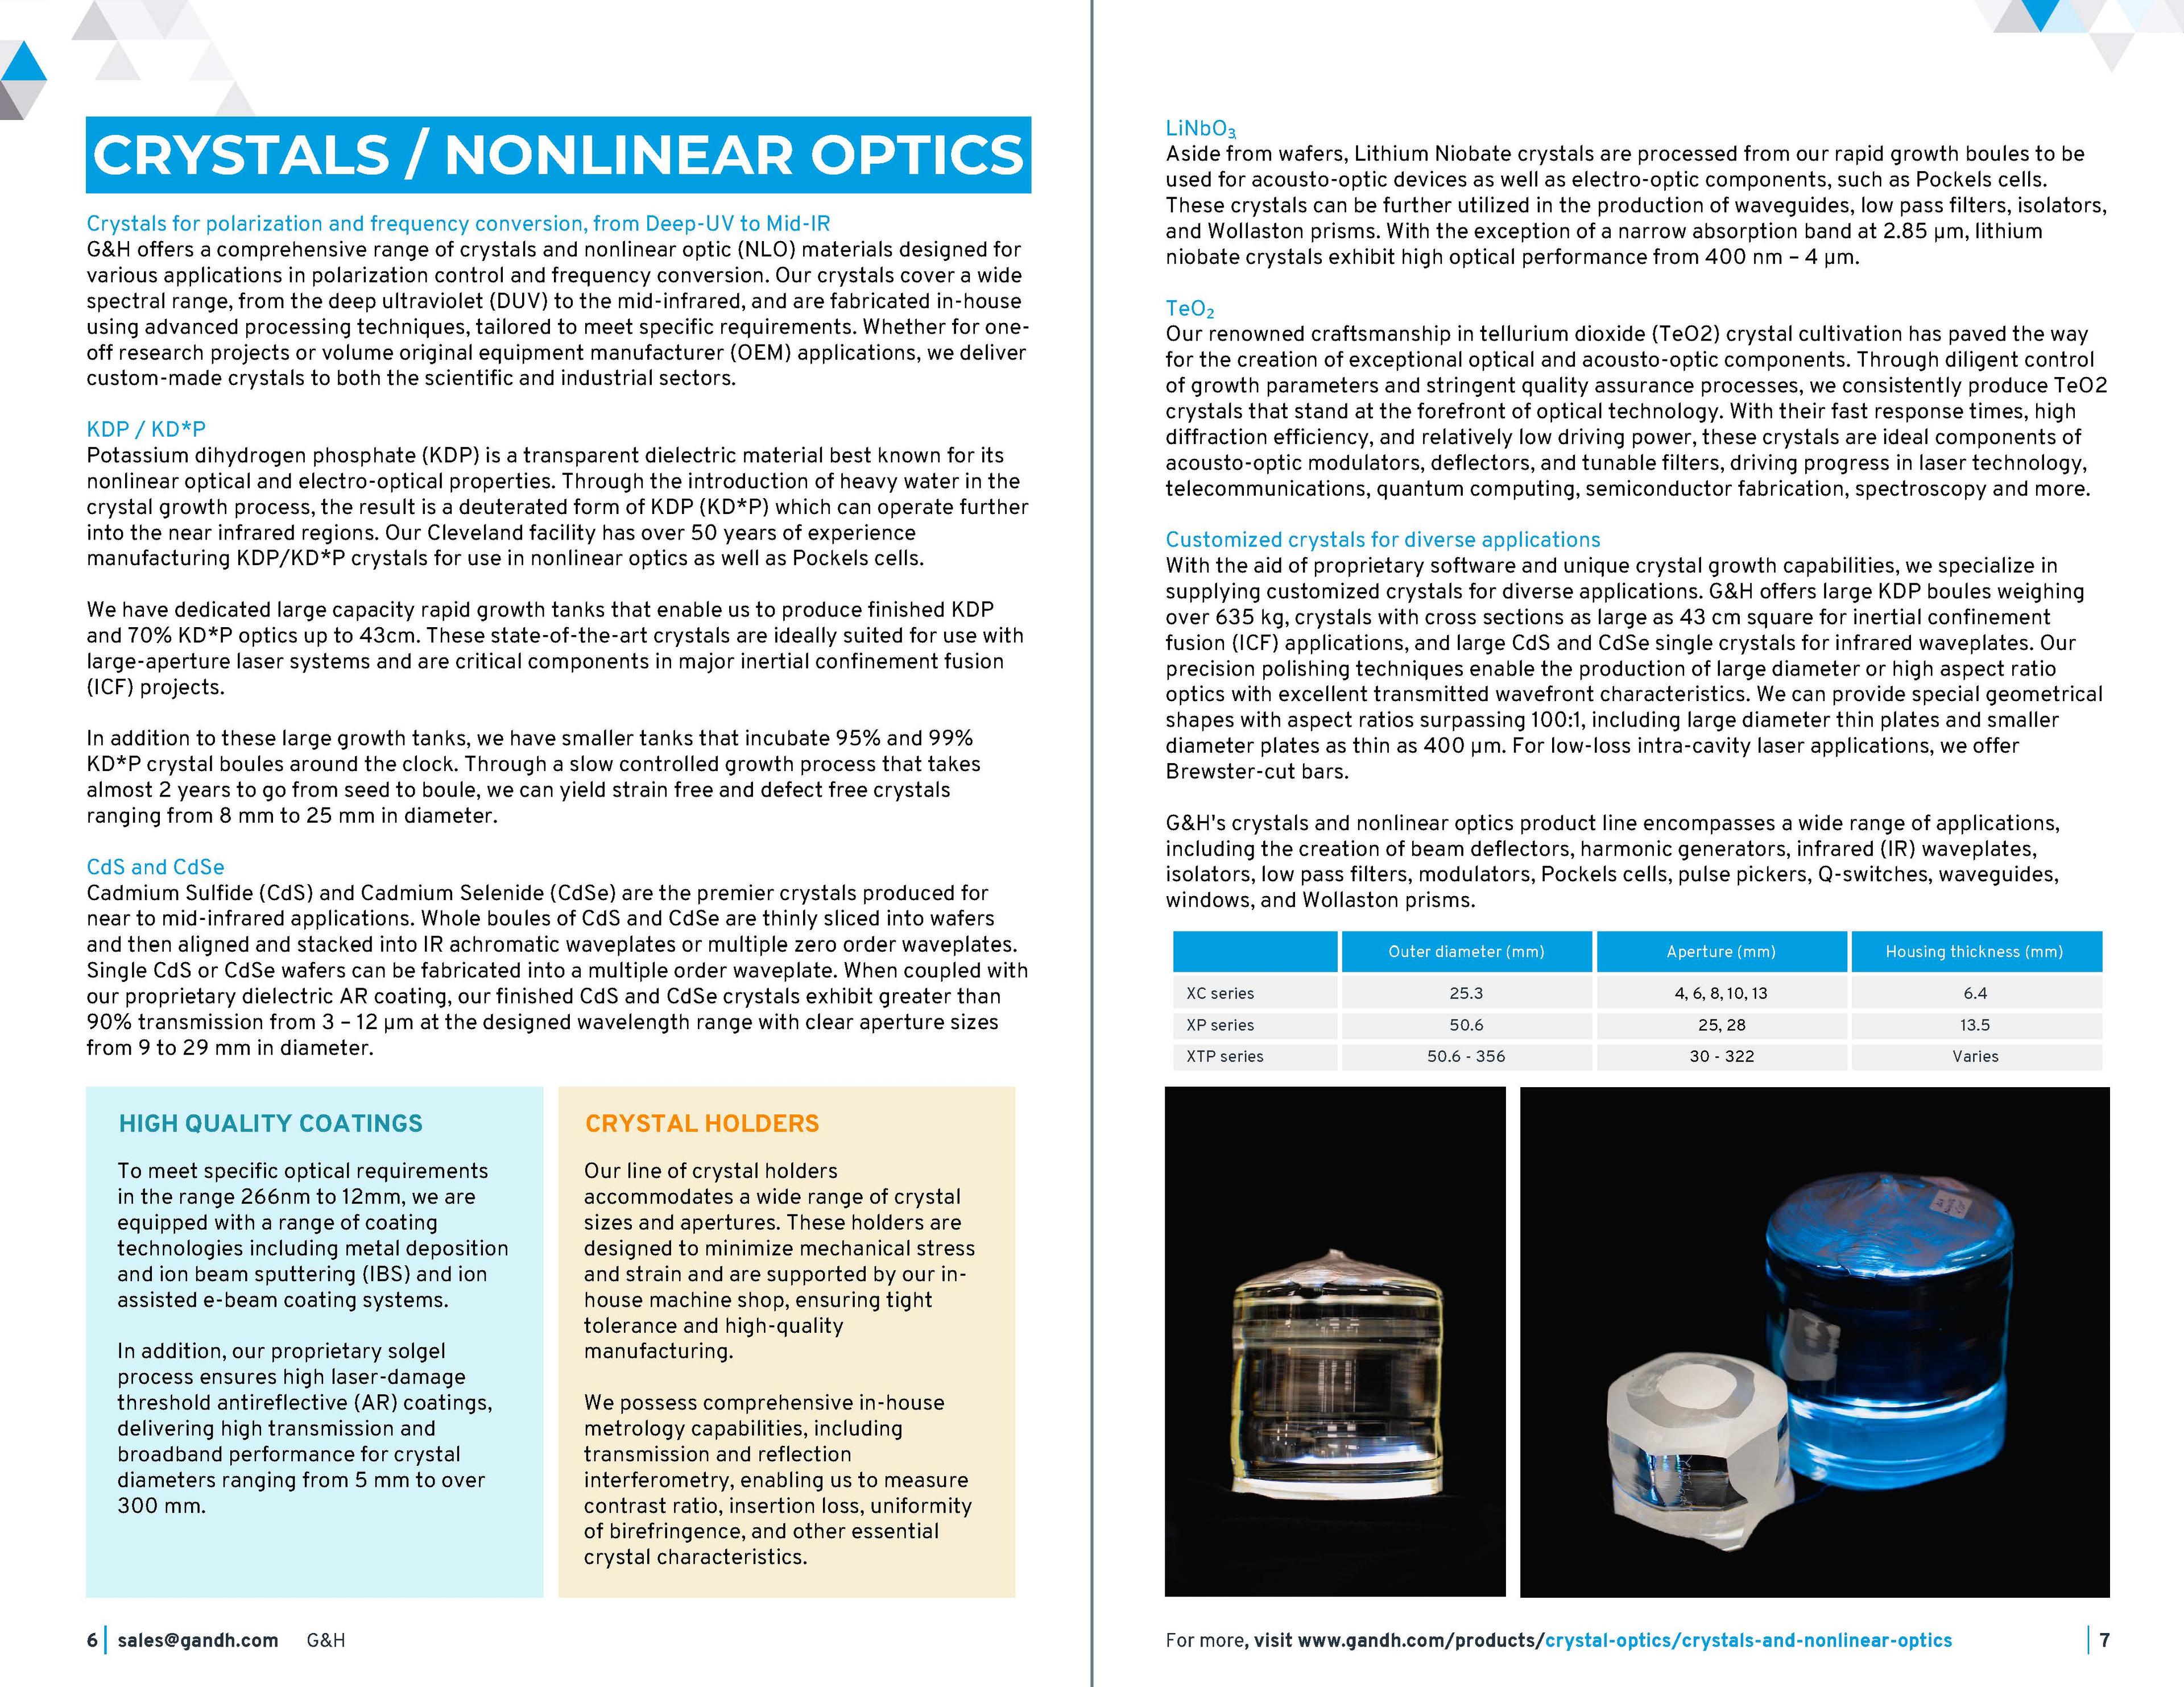 G&H Product & Solutions Guide - Crystal Optics Page 06-07